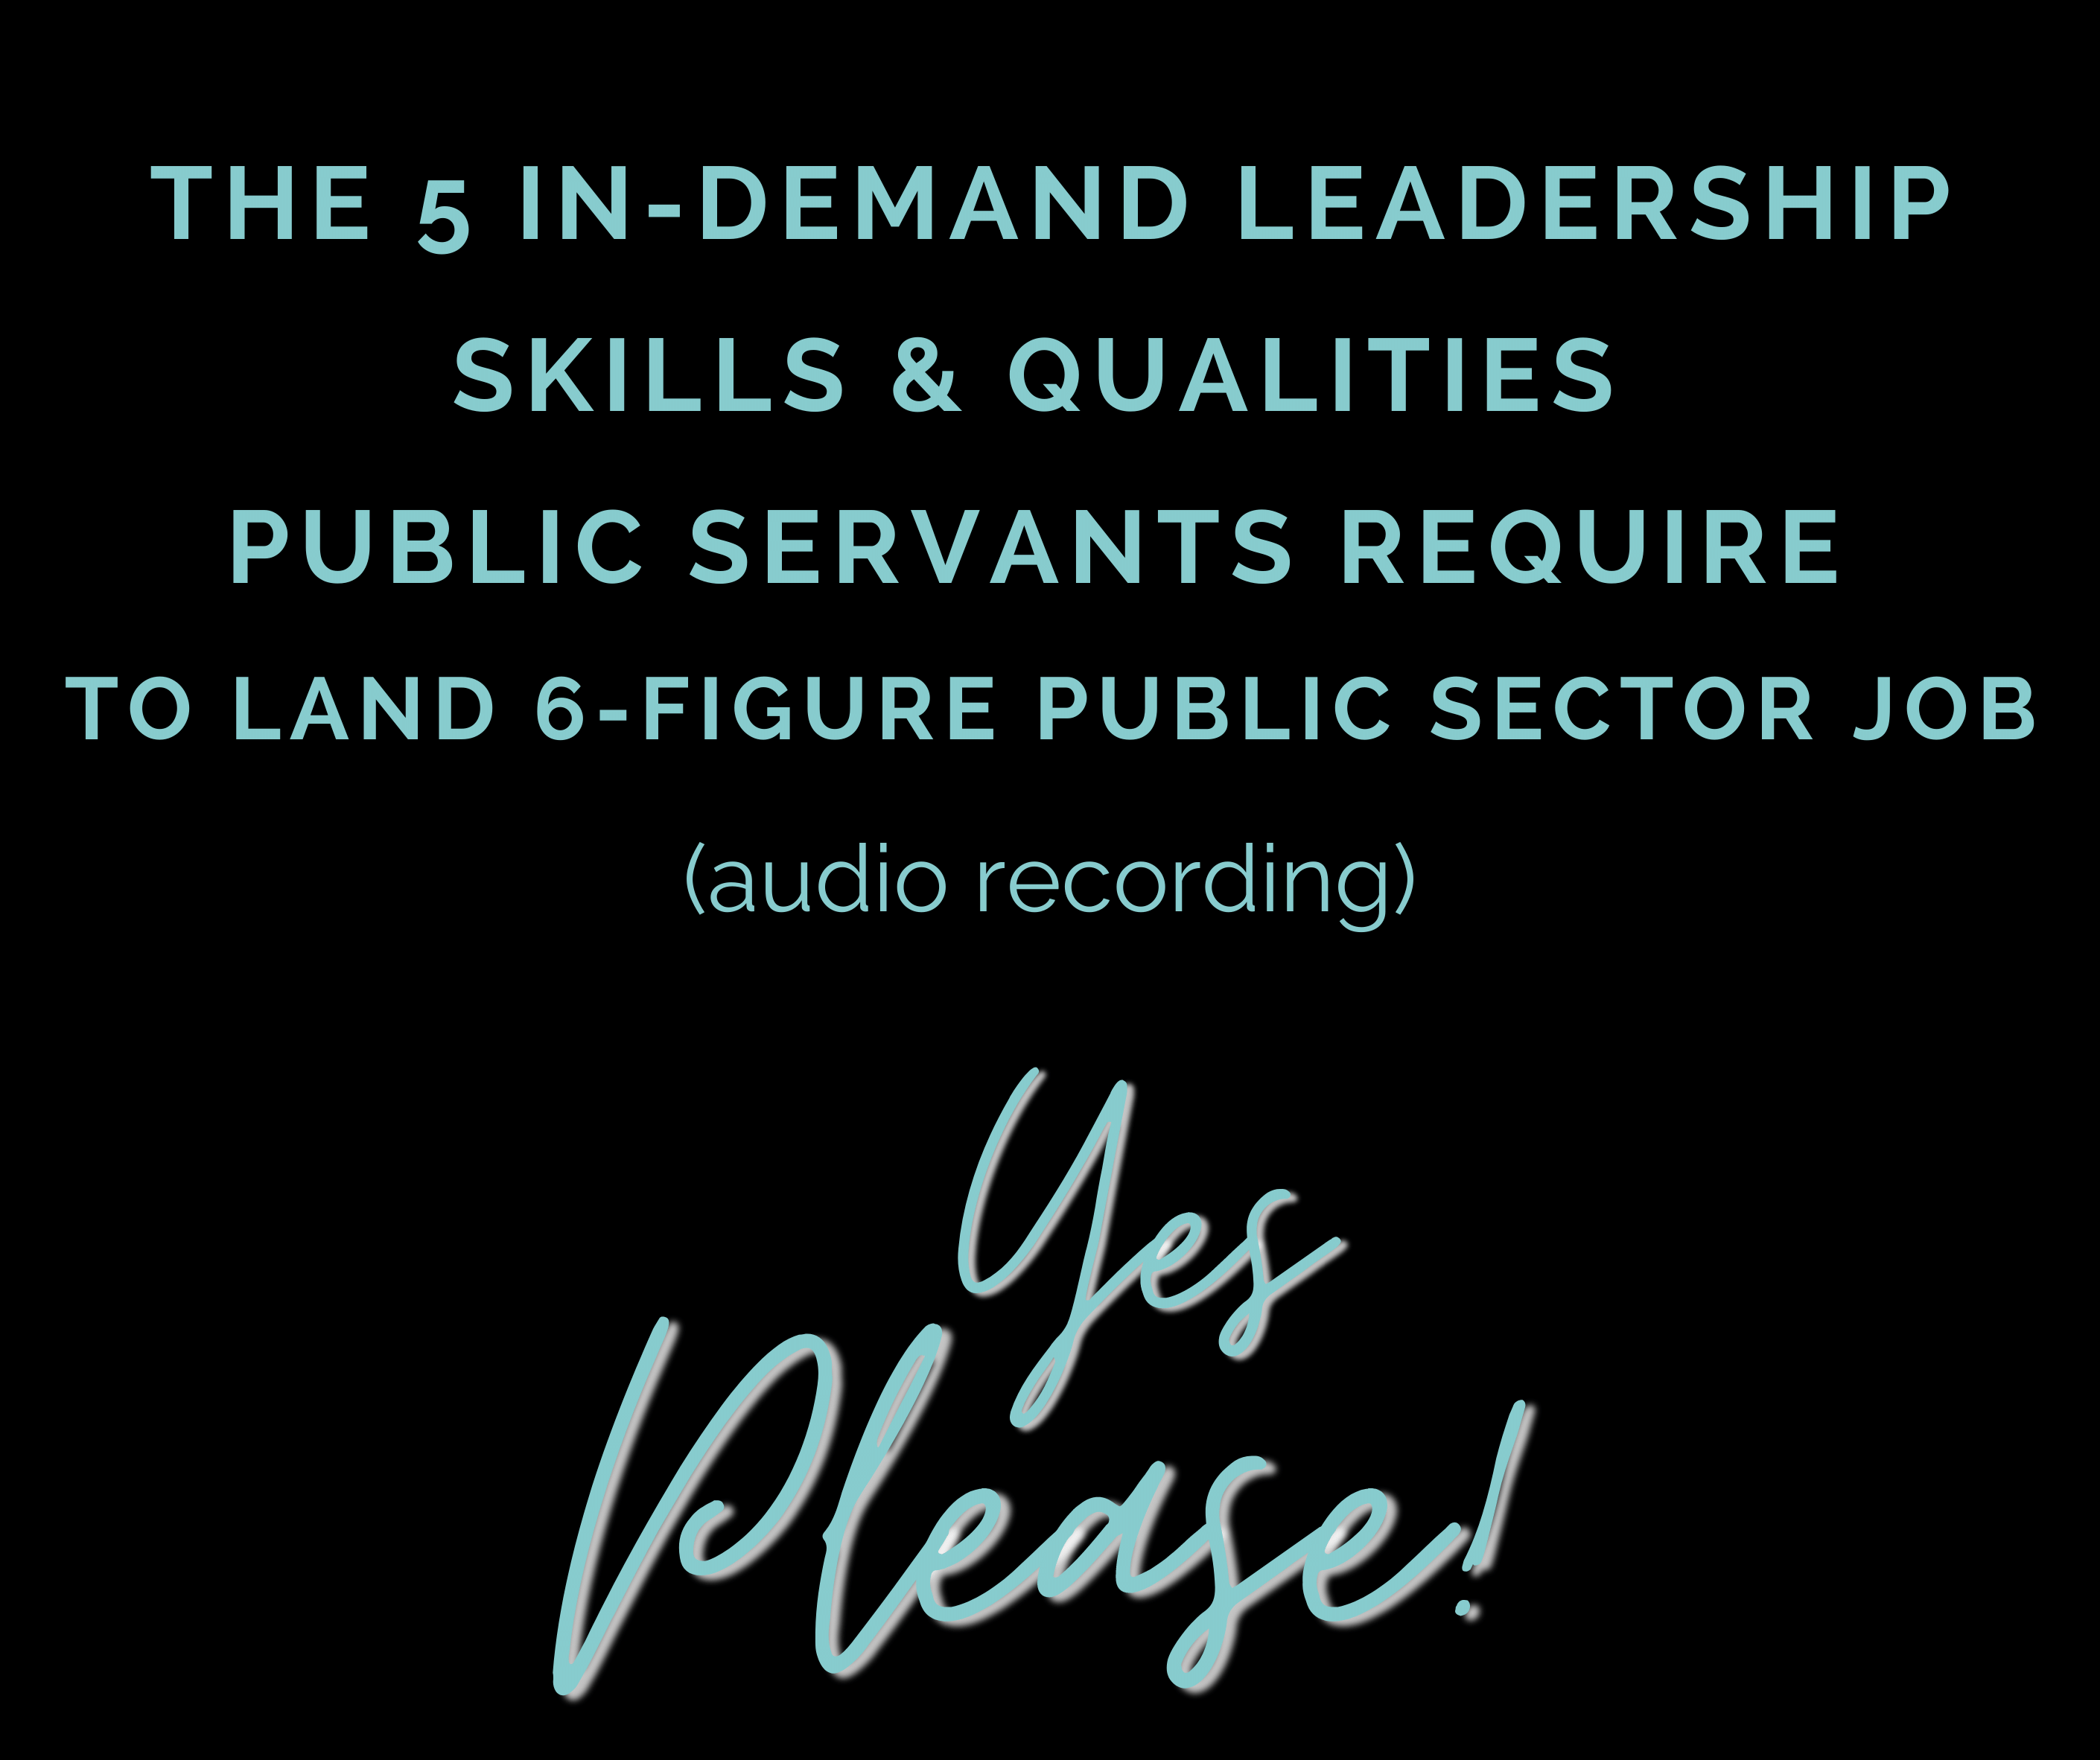 The 5 in-demand leadership skills & qualities public servants require to land a 6 figure public sector job